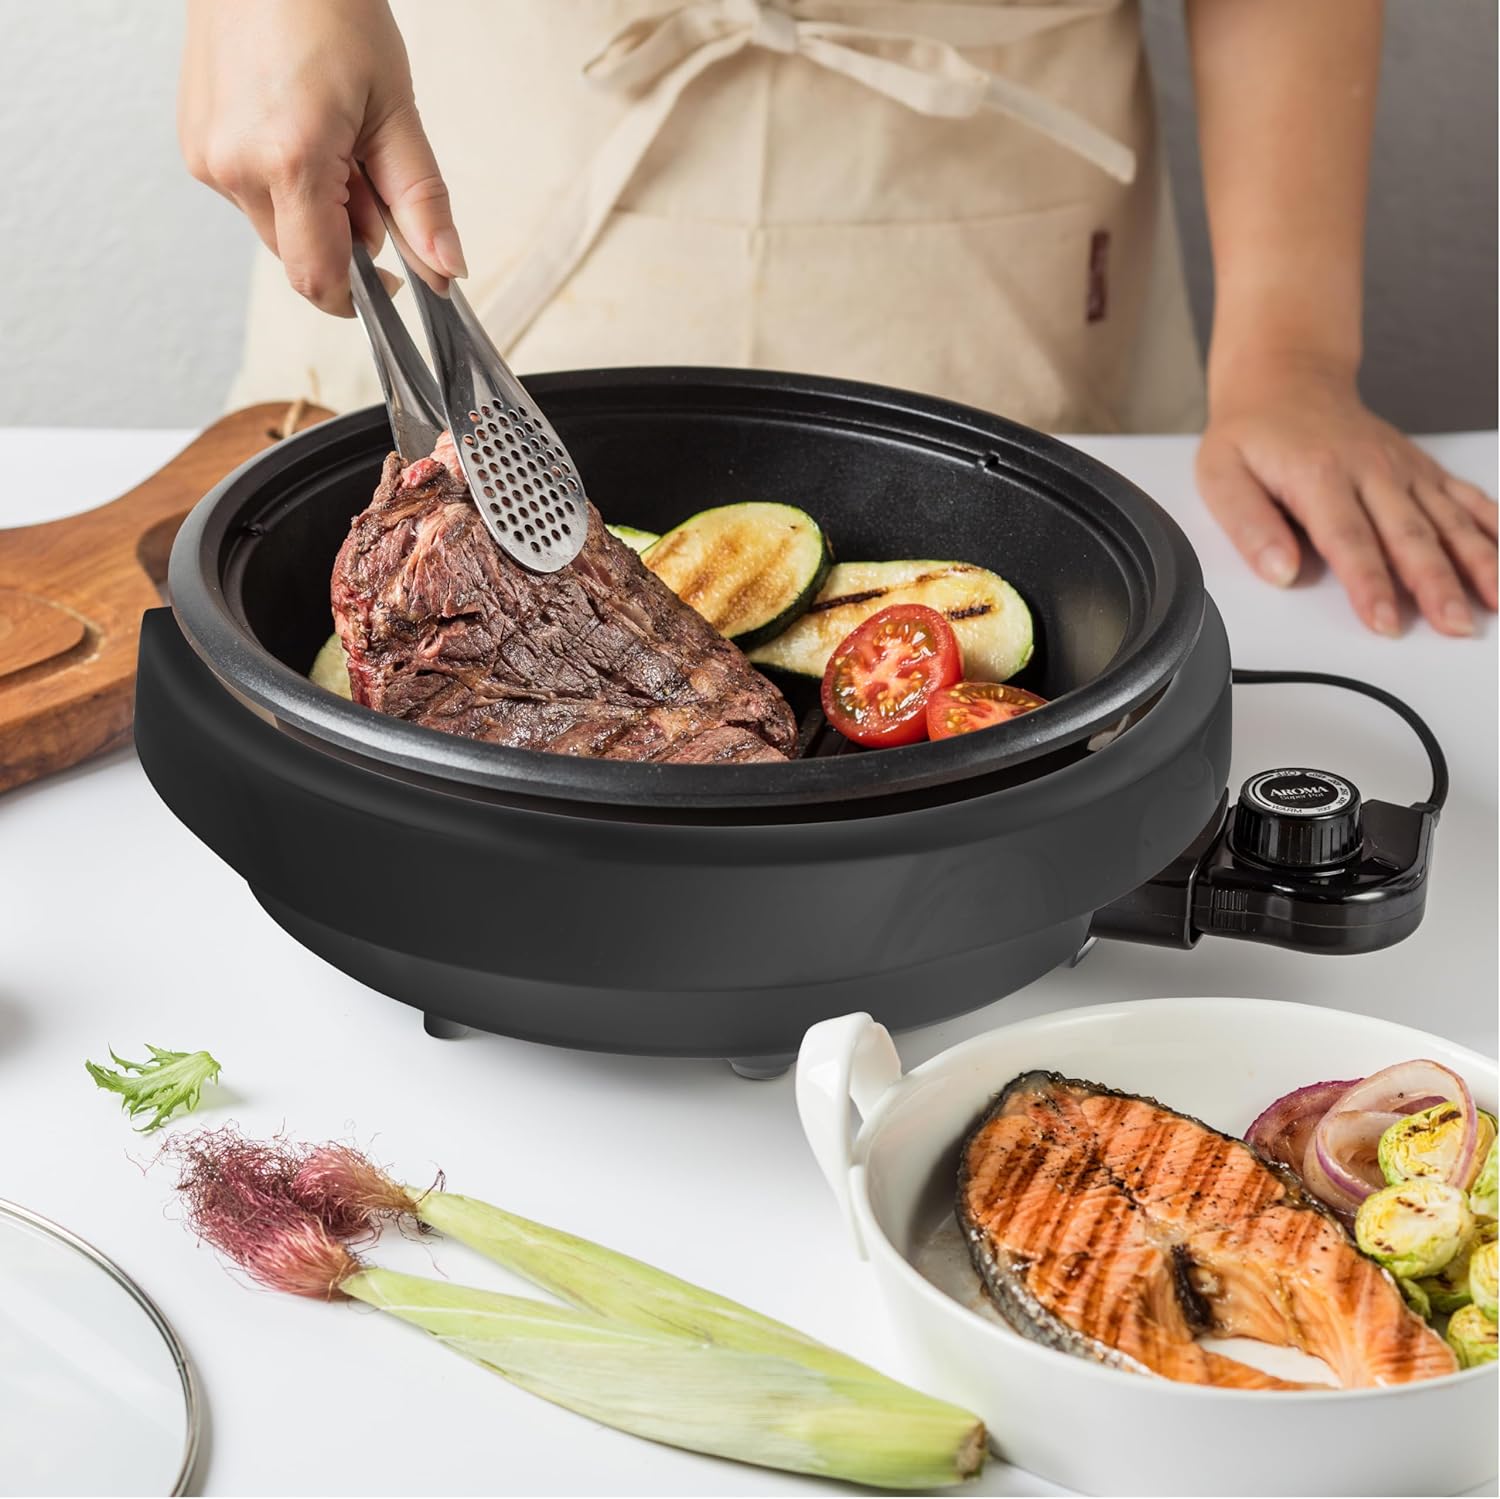 Aroma Housewares ASP-137 Grillet 3Qt. 3-in-1 Cool-Touch Electric Indoor Grill Portable, Dishwasher Safe, 3-Quart, White